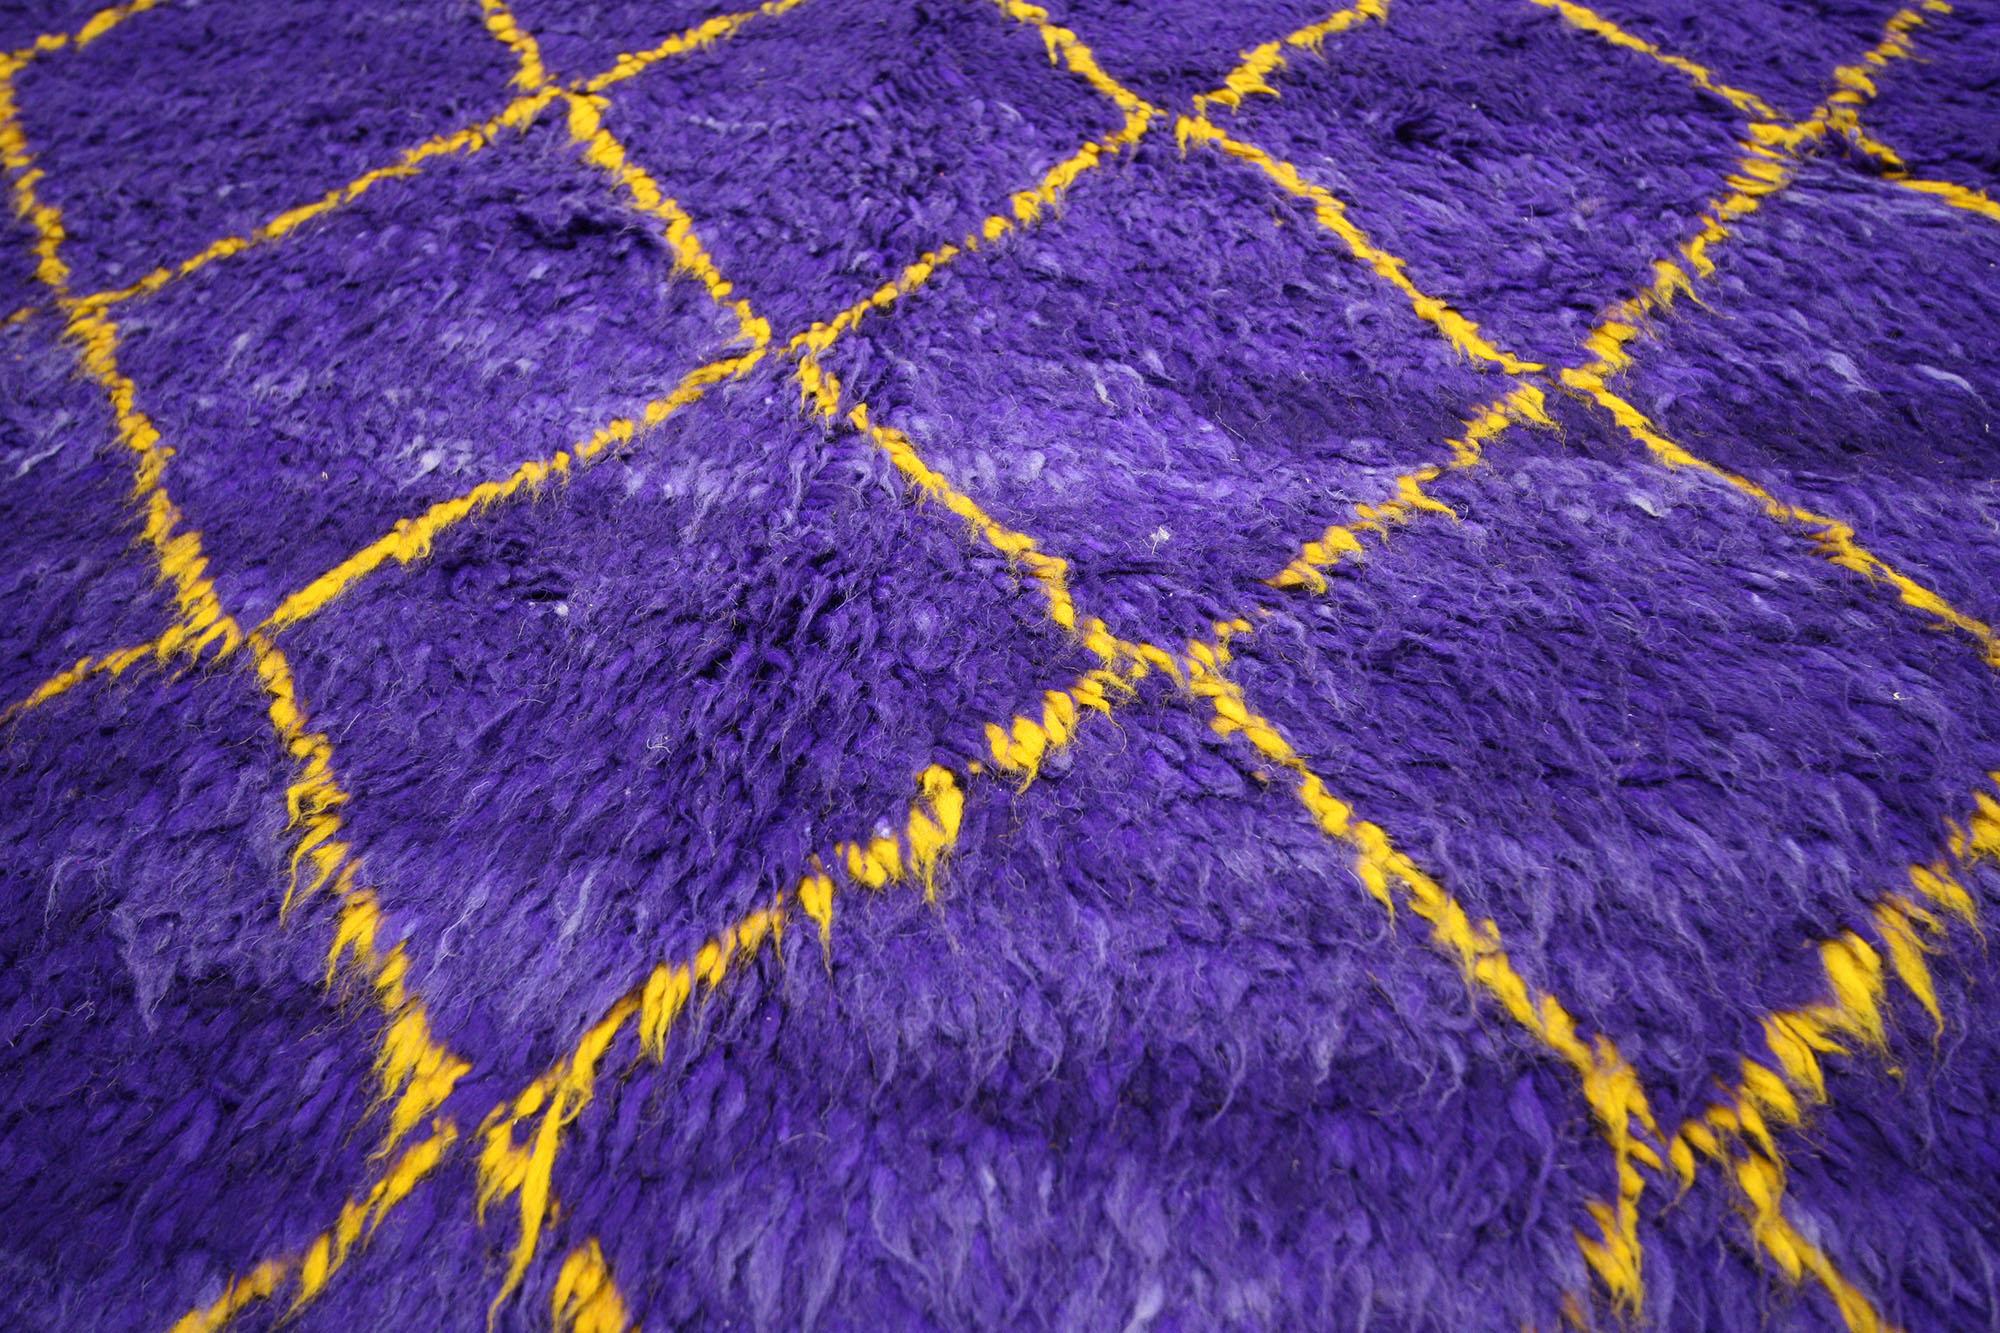 Vintage Purple Moroccan Beni Ourain Rug, Midcentury Modern Meets Boho Chic In Good Condition For Sale In Dallas, TX